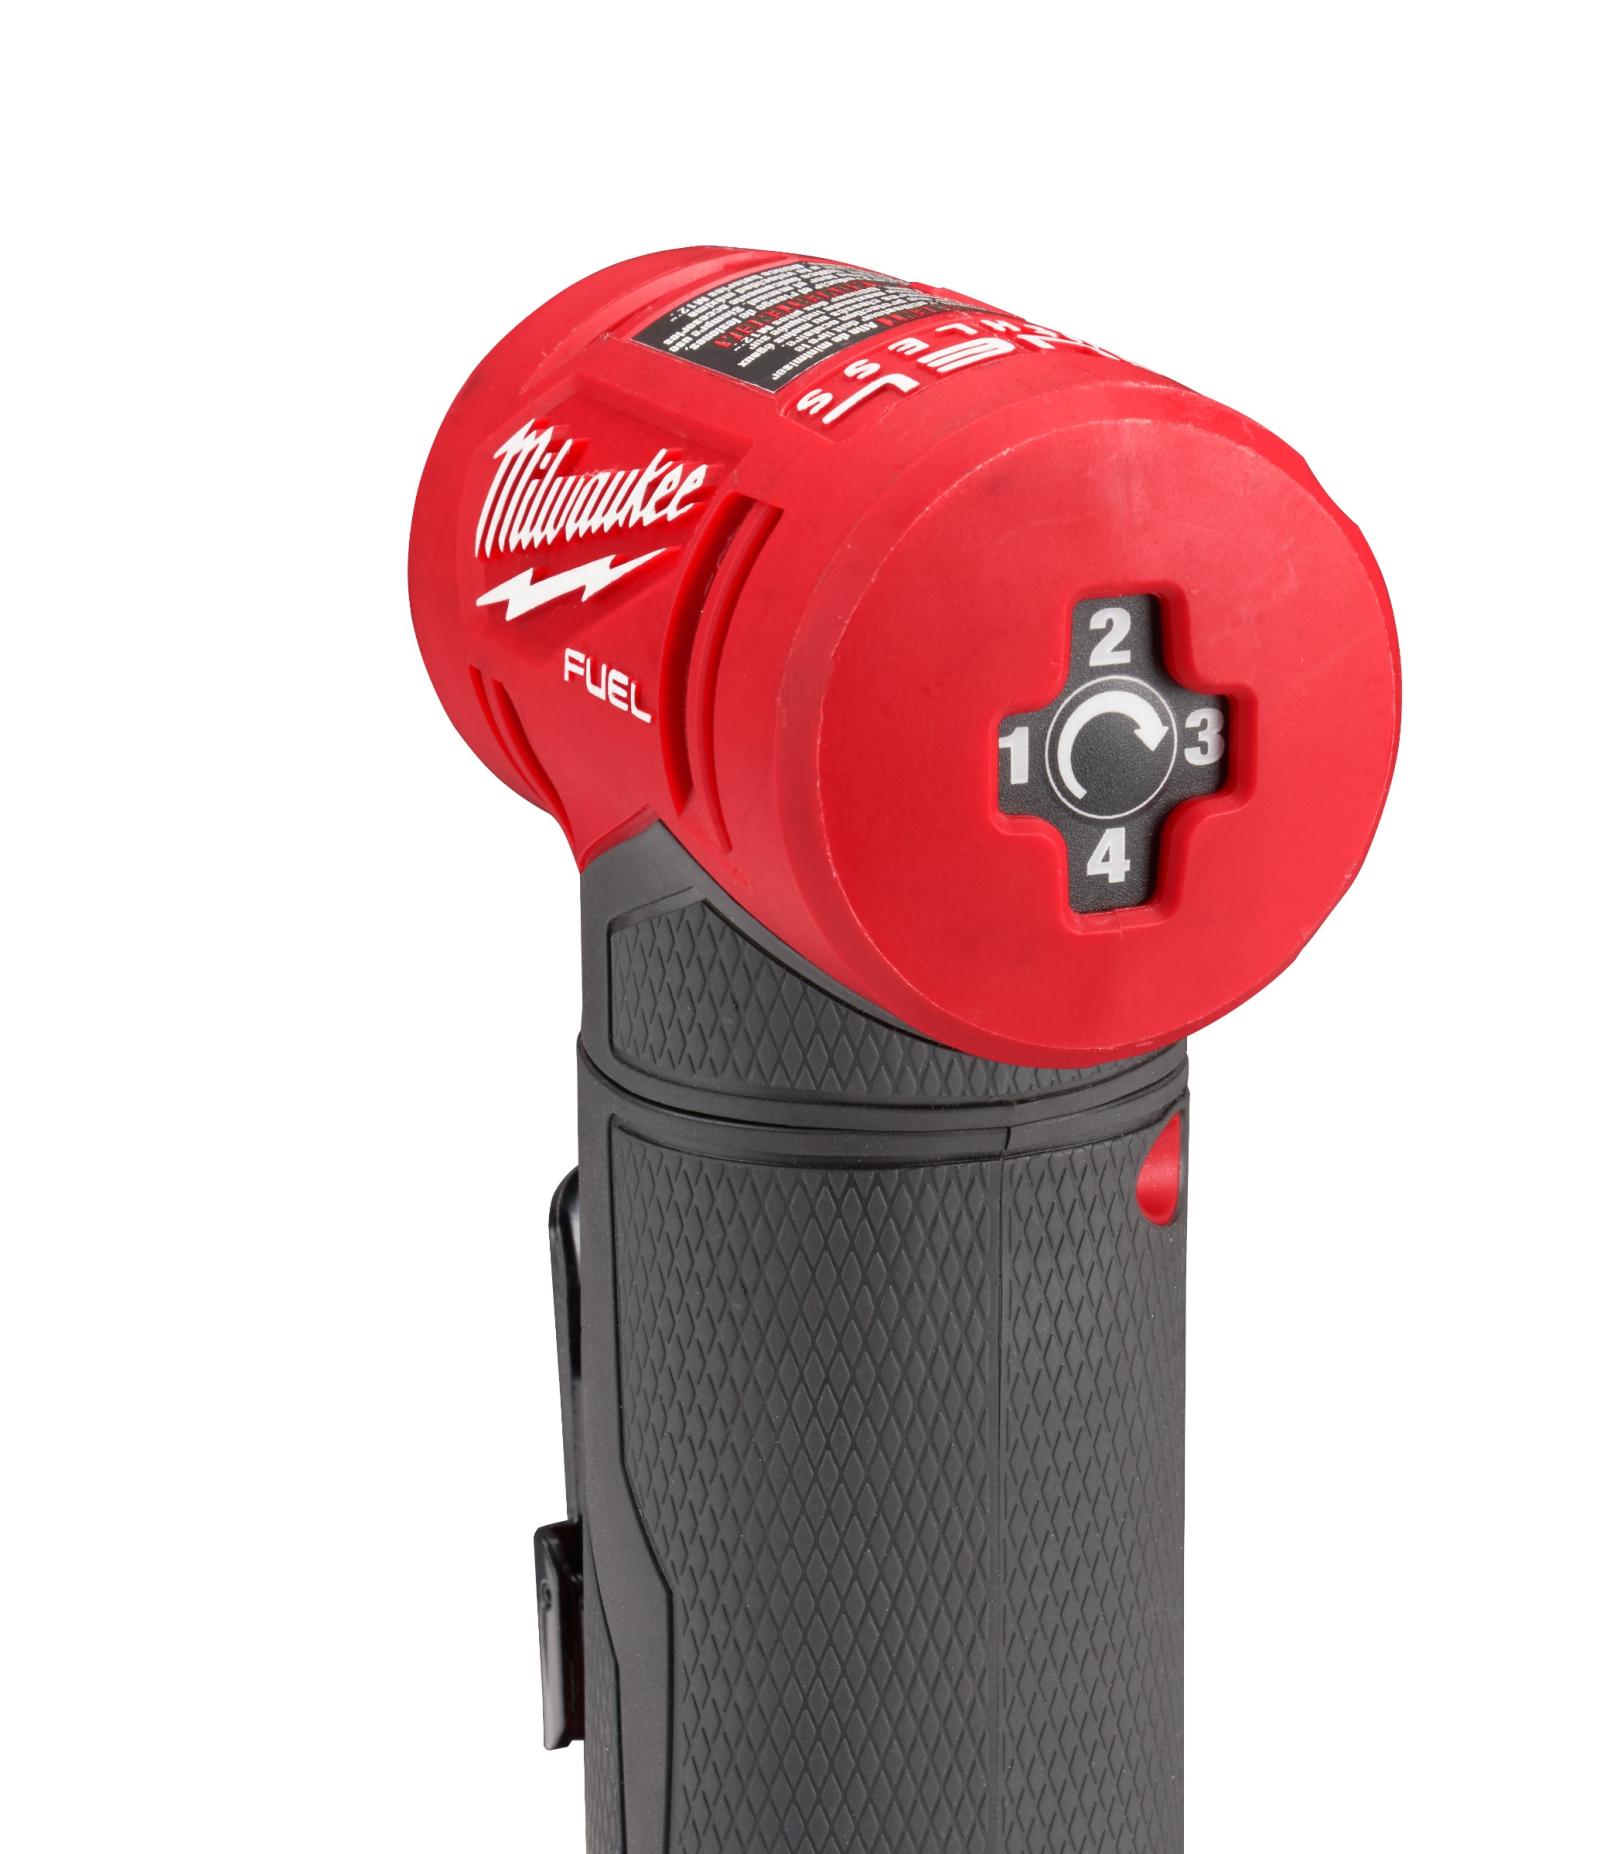 Milwaukee M12 Fuel 1/4" Right Angle Die Grinder